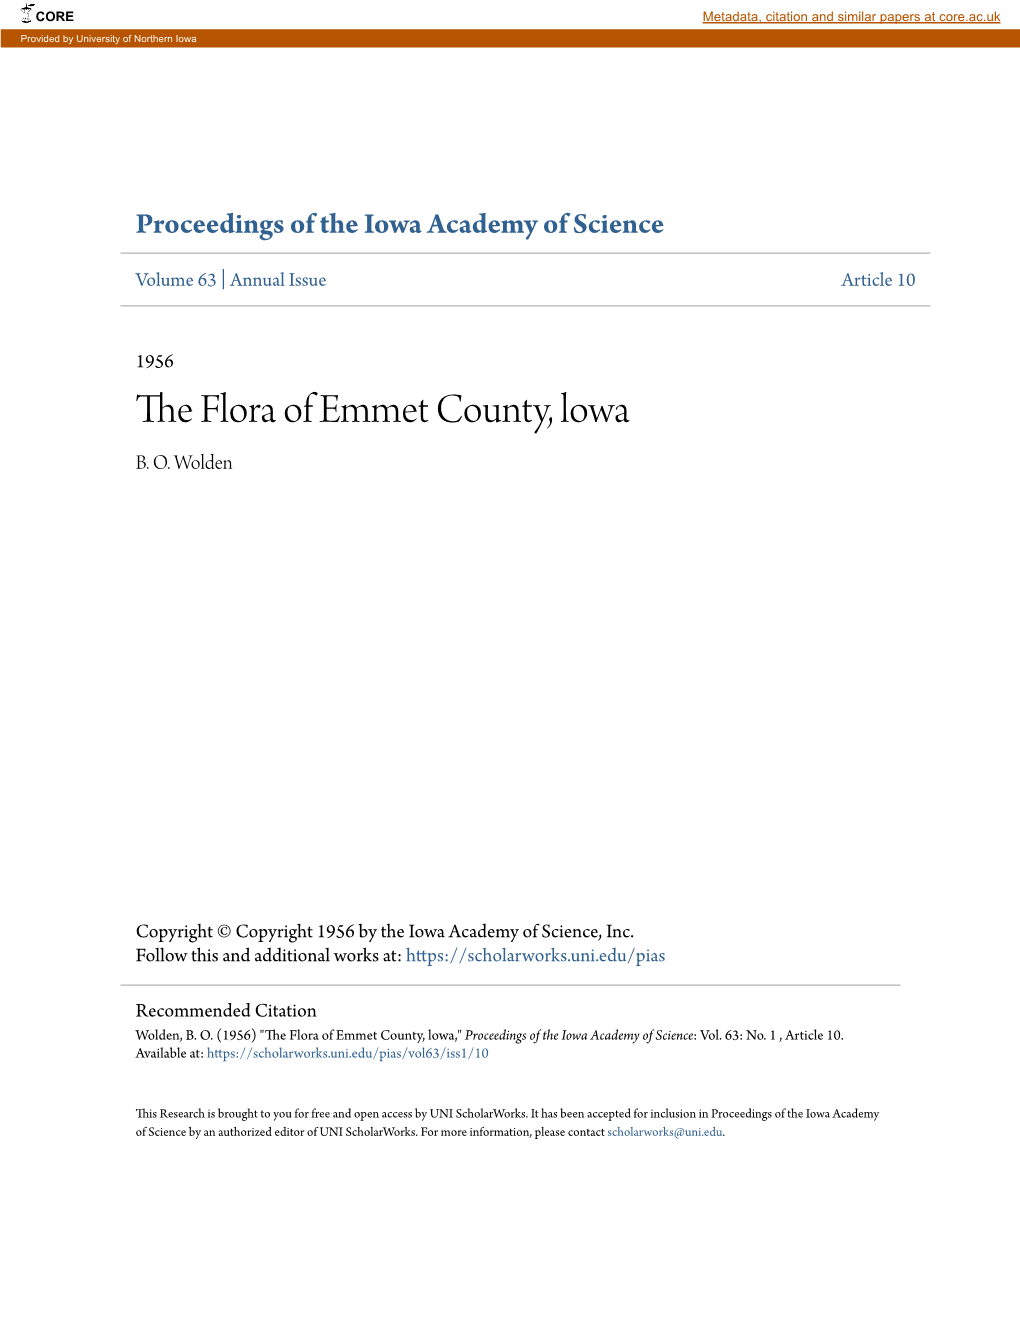 The Flora of Emmet County, Lowa," Proceedings of the Iowa Academy of Science: Vol